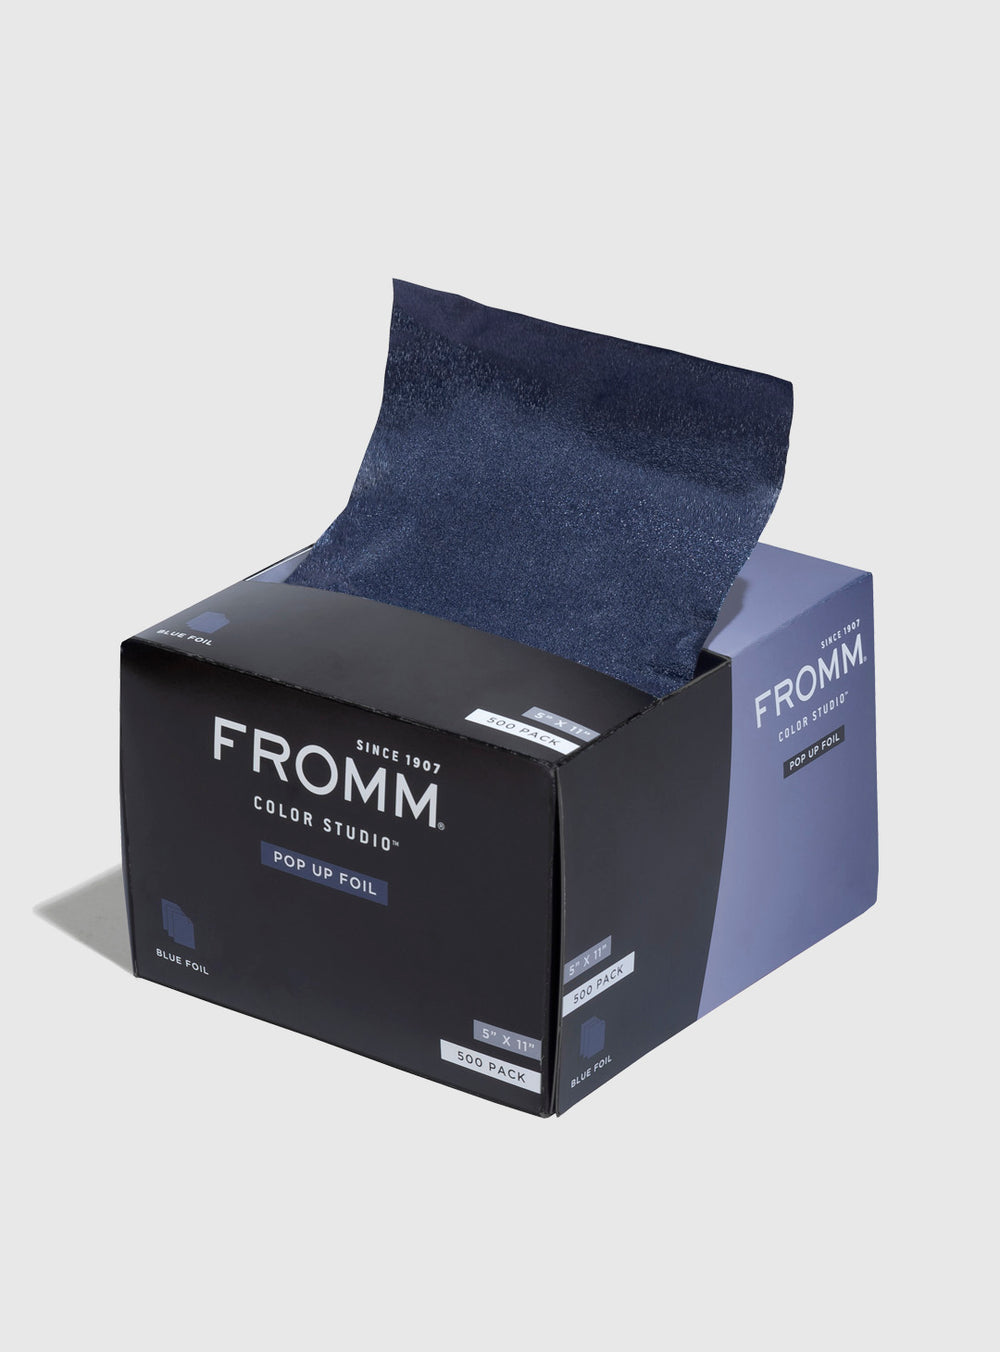 Fromm Pop Up Foil 5 in x 11 inch 500 CountHair Color AccessoriesFROMMColor: Blue